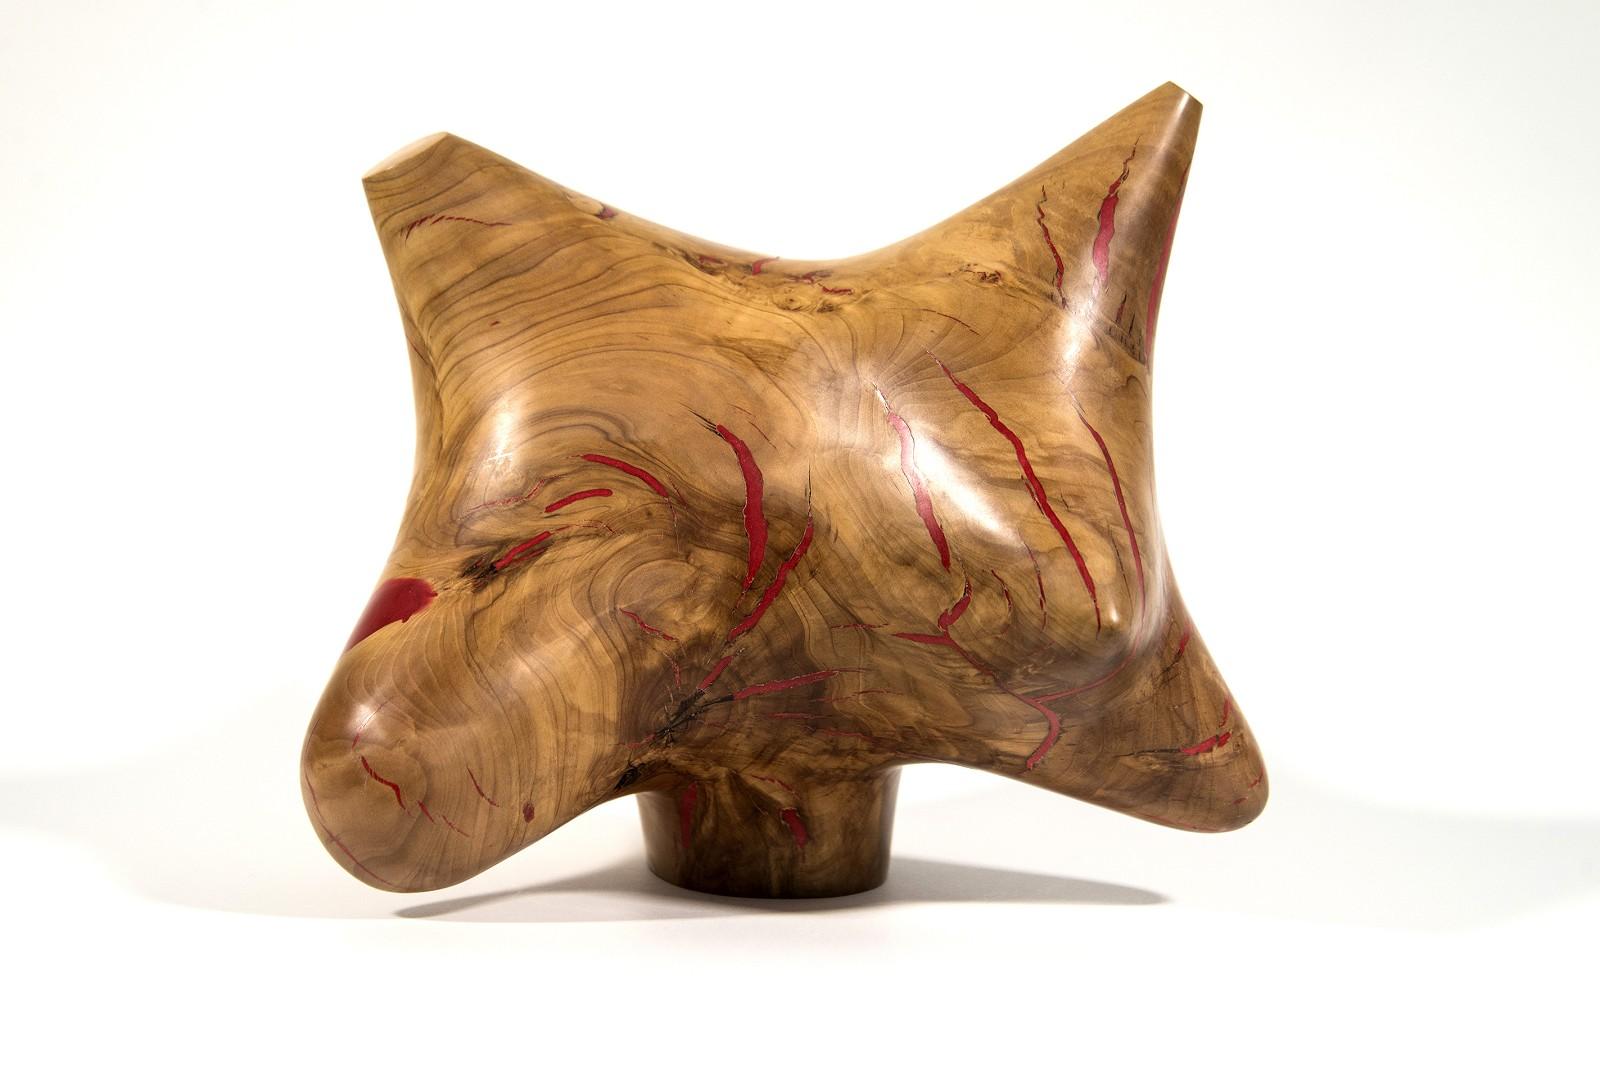 Shayne Dark Abstract Sculpture - Windfall Series II No 9 - smooth, carved, abstract, Applewood & resin sculpture